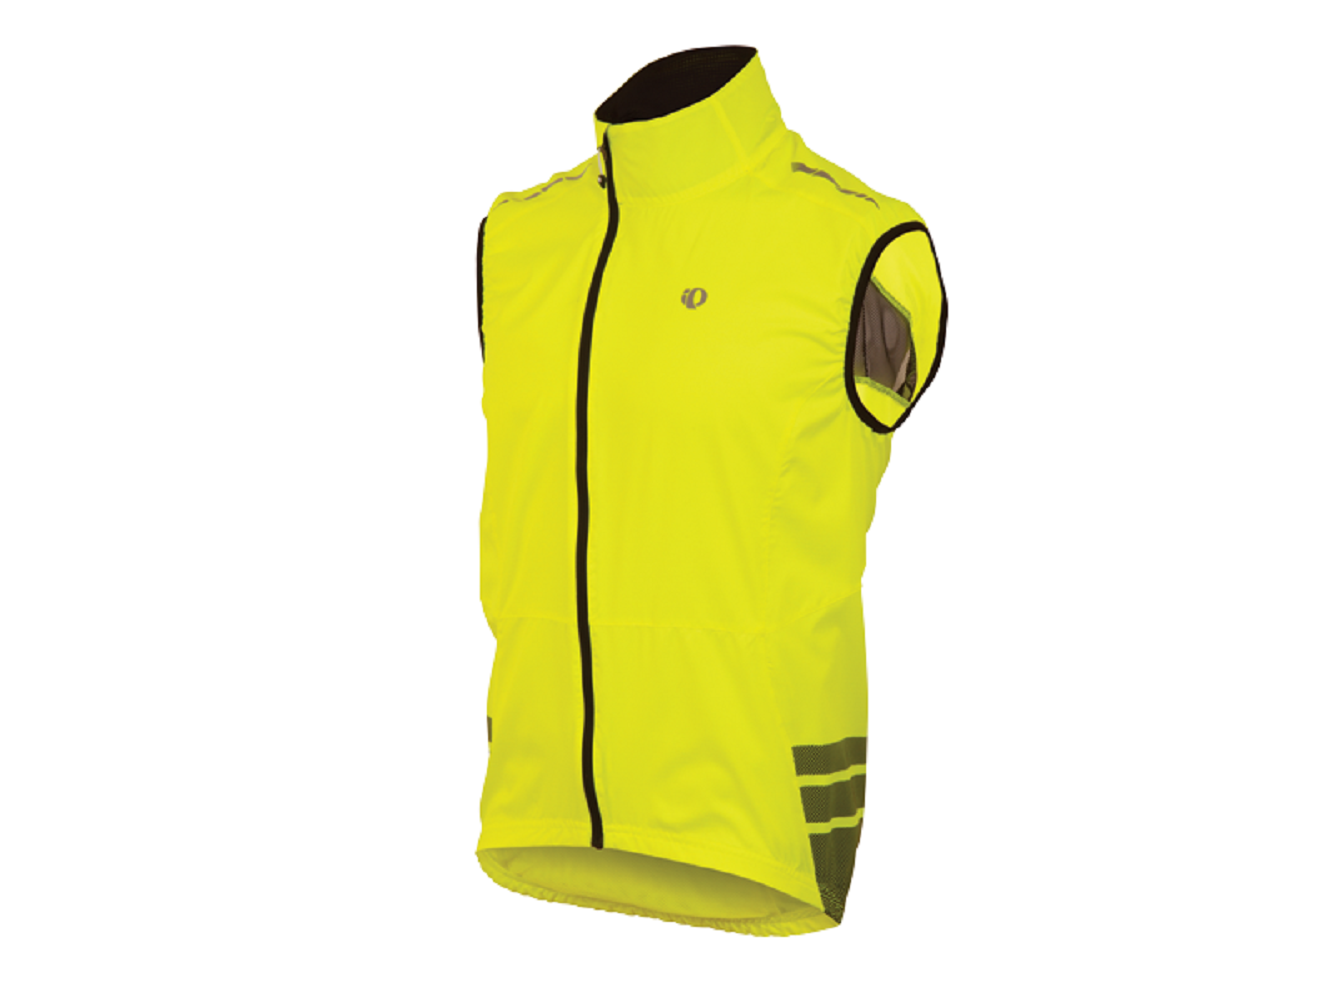 PEARL iZUMi Elite Barrier Cycling Vest Mens Screaming Yellow Bicycling Vest XL